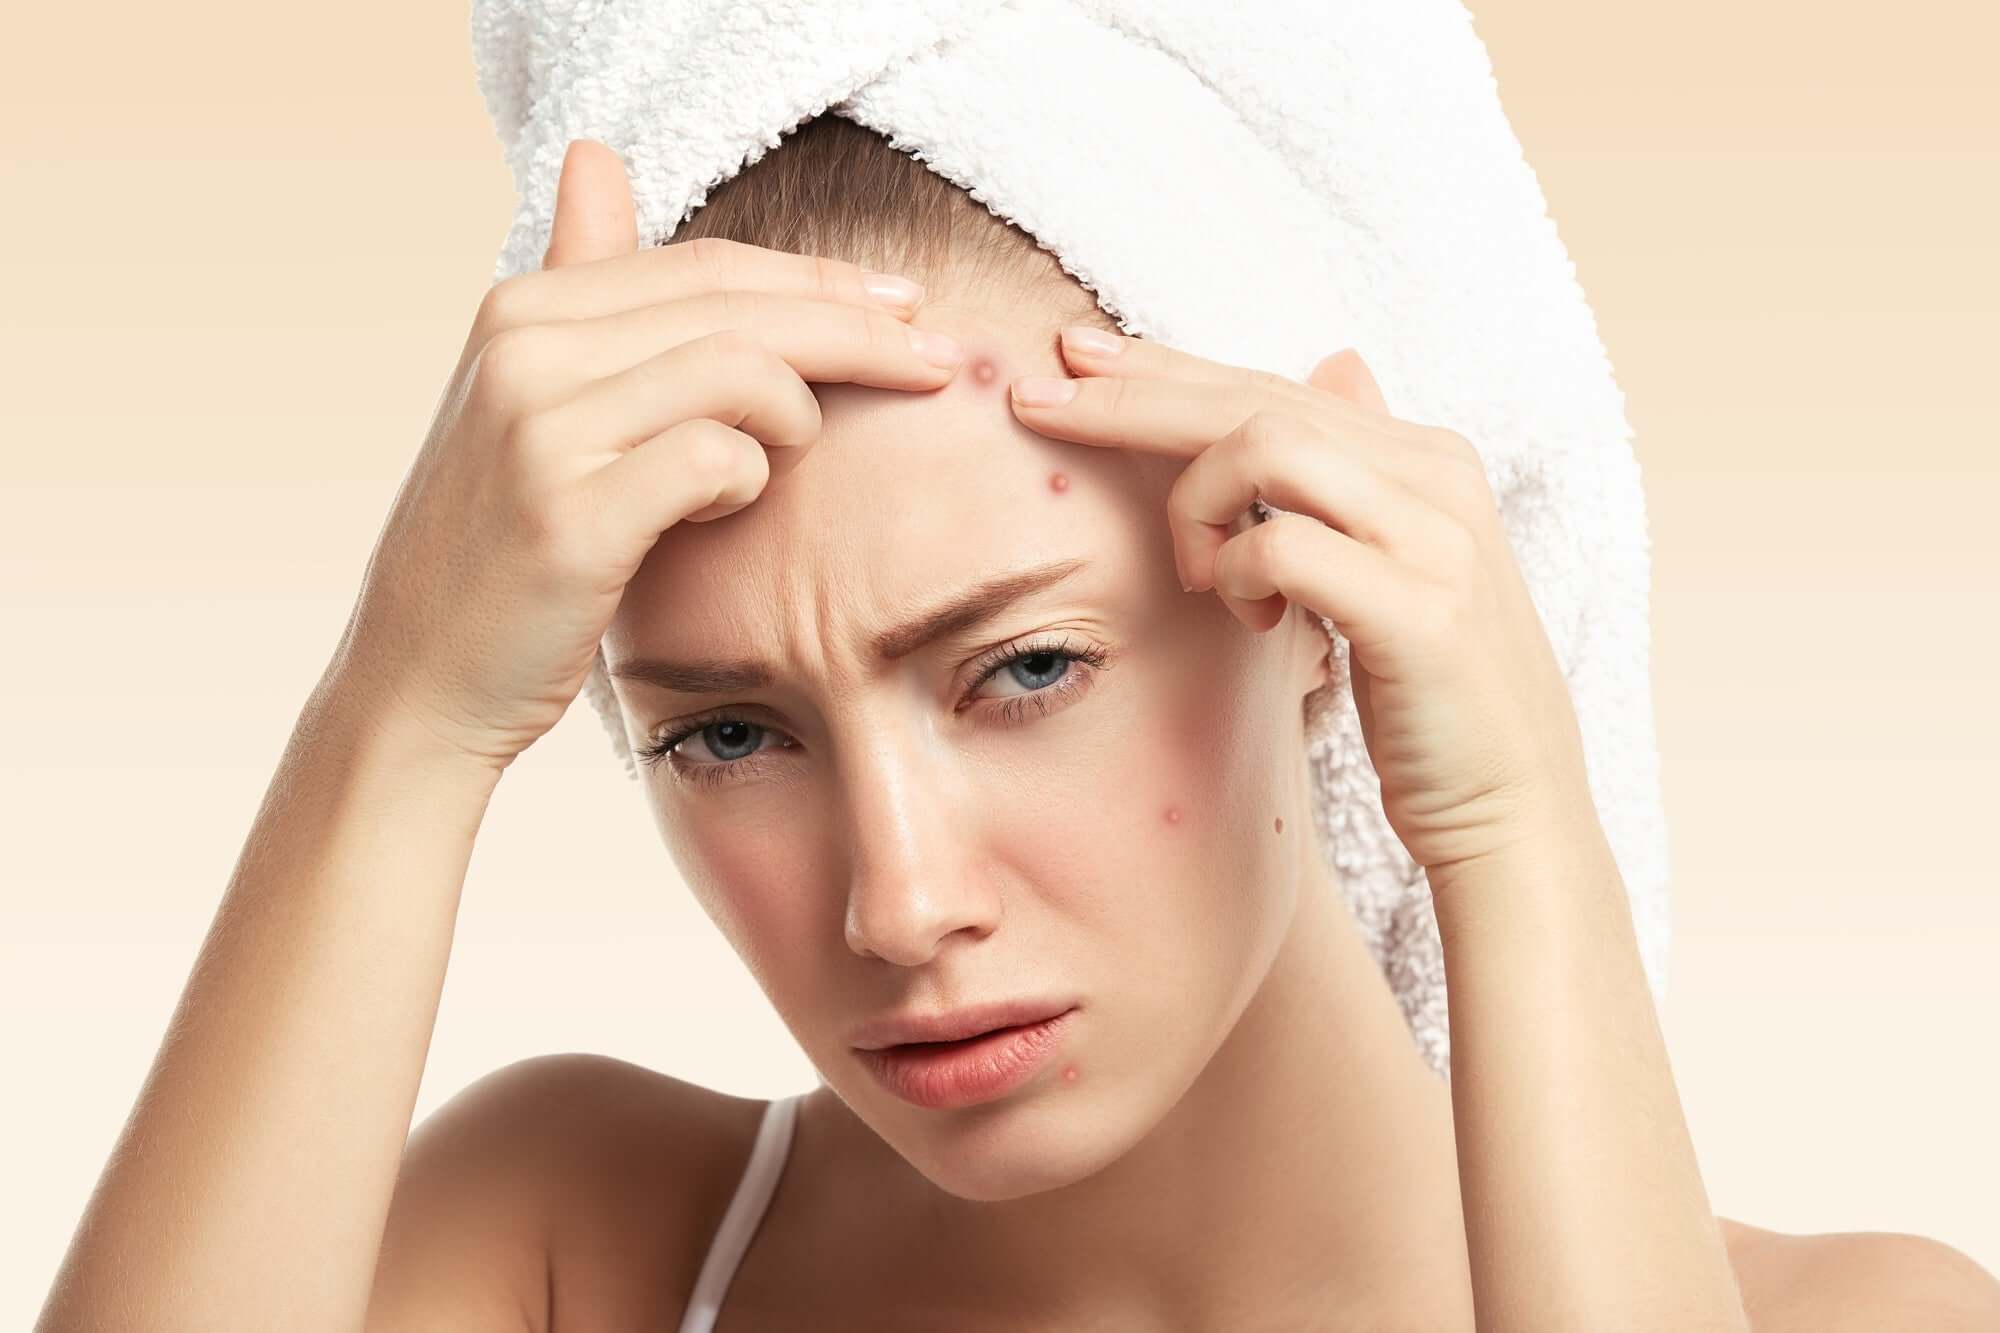 Woman checking out her acne while frowning